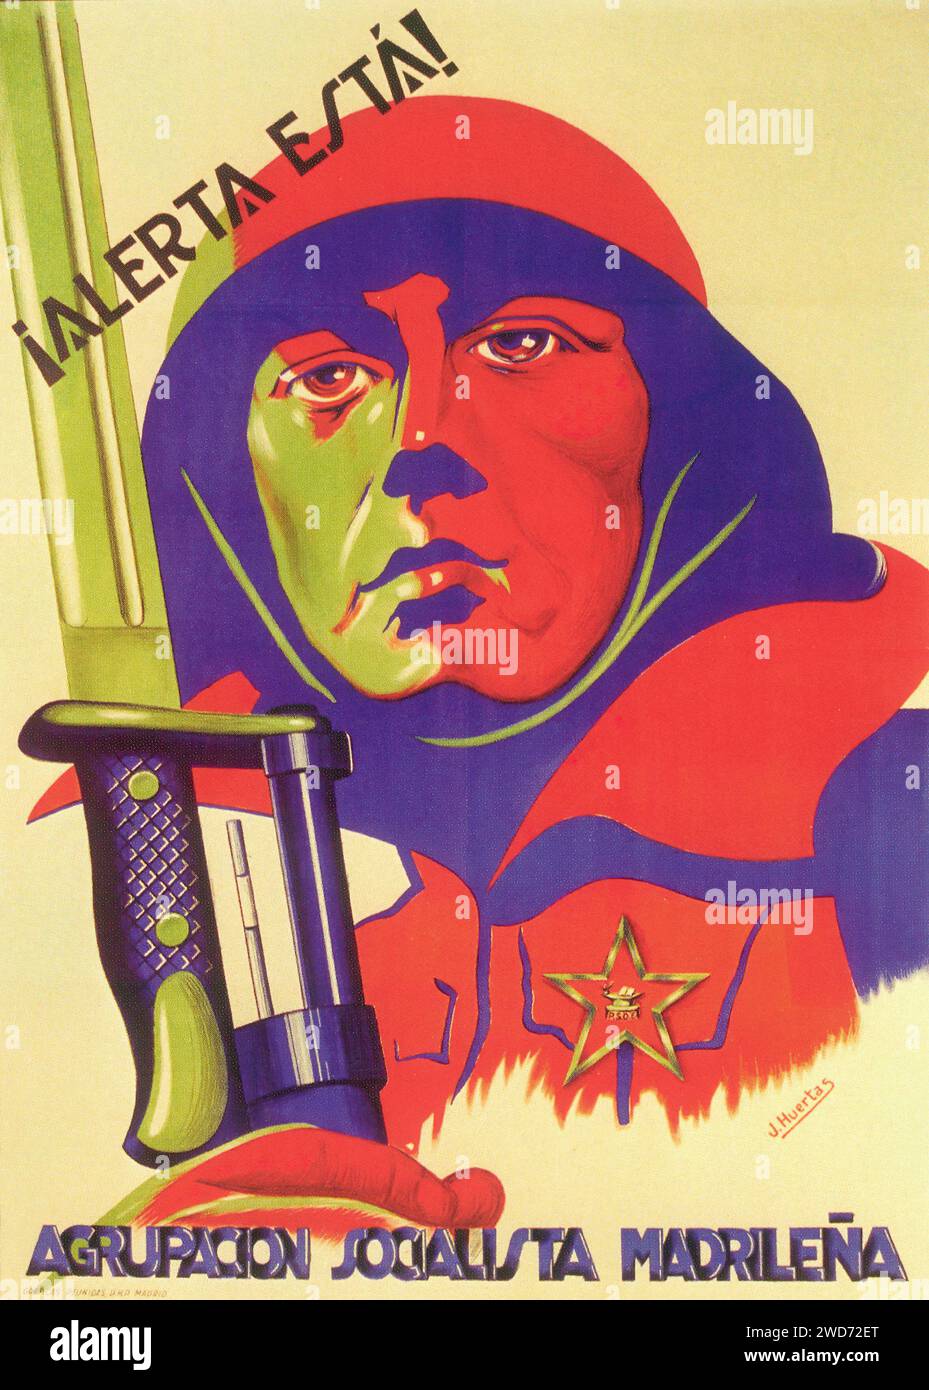 '¡ALERTA ESTÁ! AGRUPACIÓN SOCIALISTA MADRILEÑA' 'Stay alert! Madrid Socialist Group.' This poster from the Spanish Civil War uses striking red and green colors to depict a vigilant figure   symbolizing the need for awareness. The poster's bold design and vibrant colors serve as a call to action for the Madrid Socialist Group, advocating for readiness and vigilance  - Spanish Civil War (Guerra Civil Española) Propaganda Poster Stock Photo